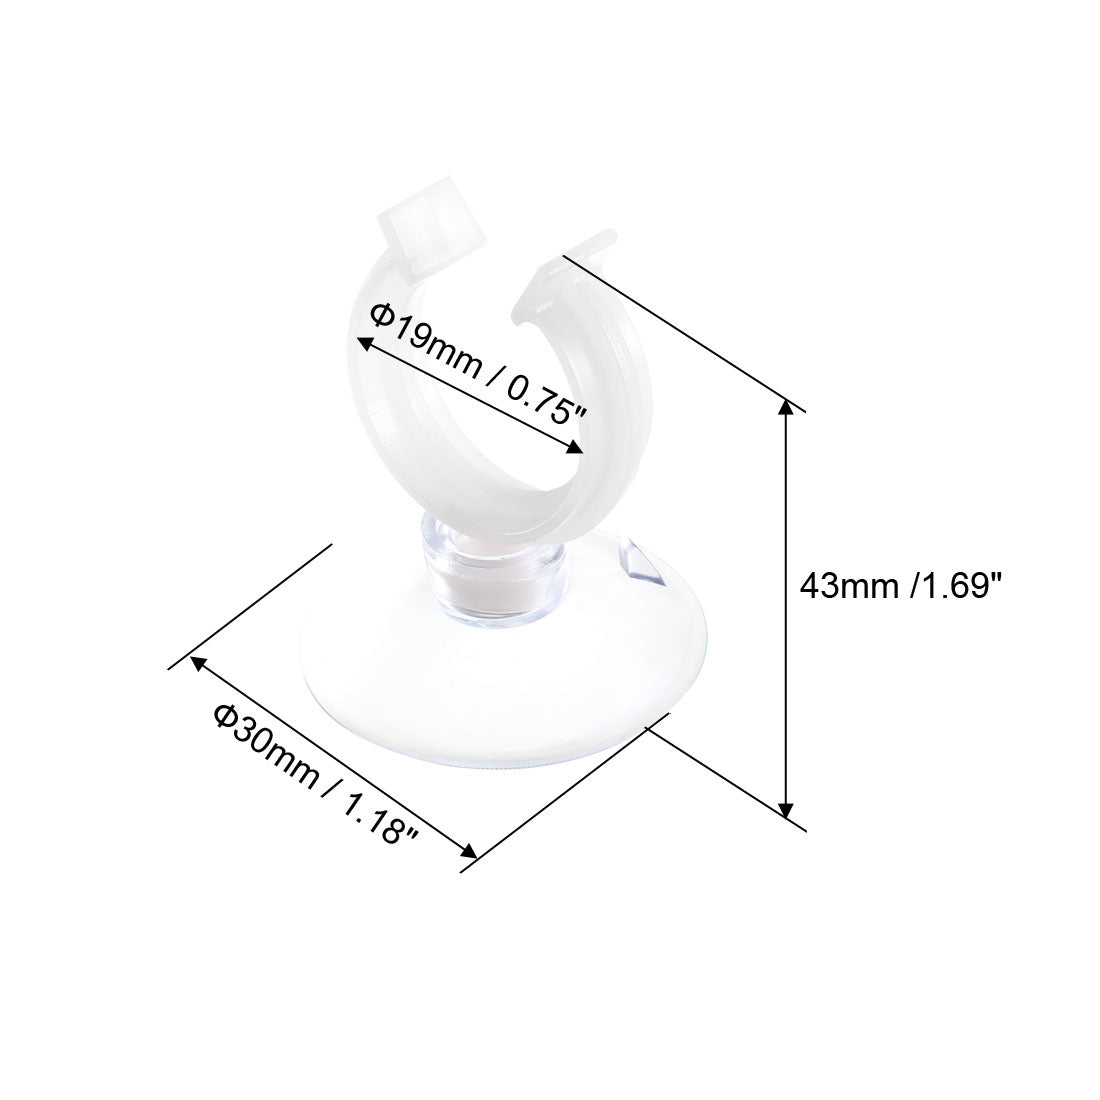 uxcell Uxcell Aquarium Suction Cup Clips Airline Tube Holders Clamps for Fish Tank Clear 19mm 12Pcs